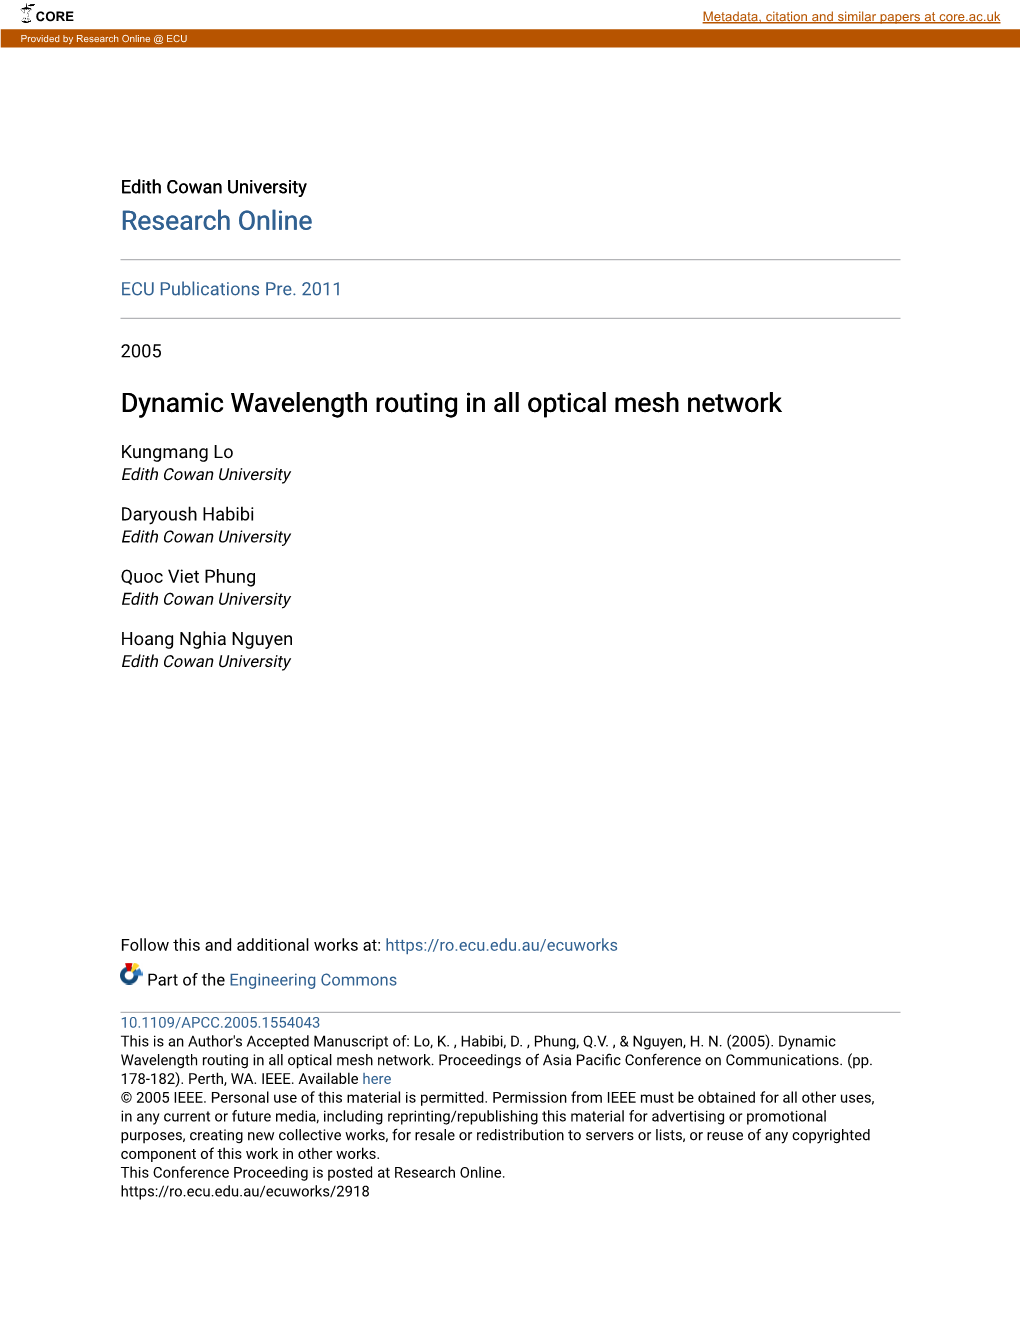 Dynamic Wavelength Routing in All Optical Mesh Network